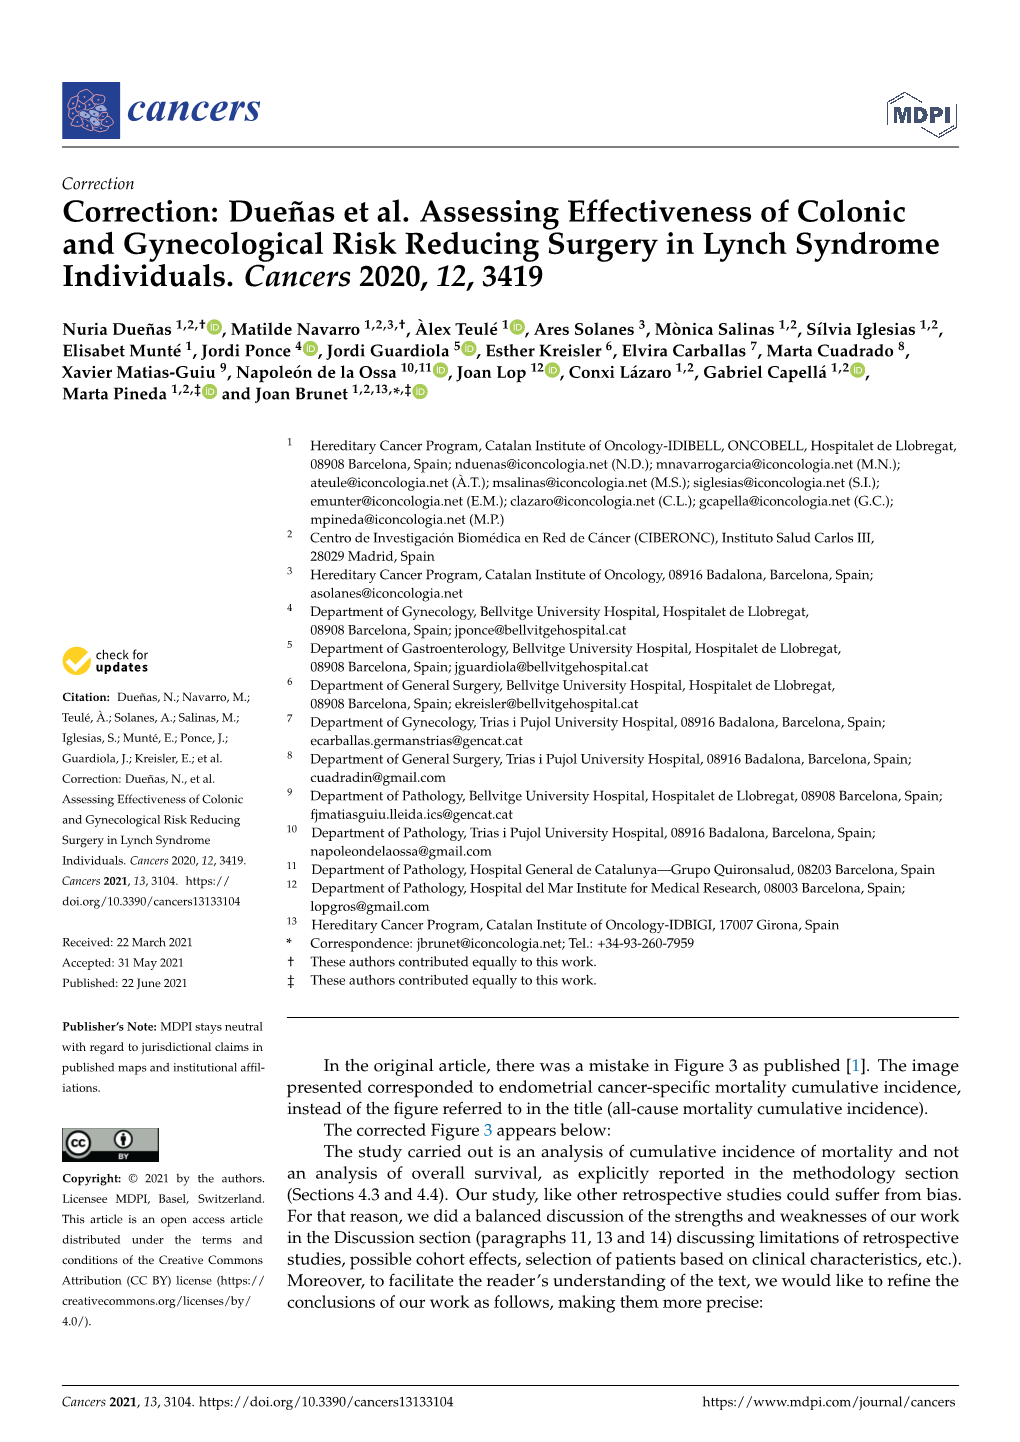 Correction: Dueñas Et Al. Assessing Effectiveness of Colonic and Gynecological Risk Reducing Surgery in Lynch Syndrome Individuals